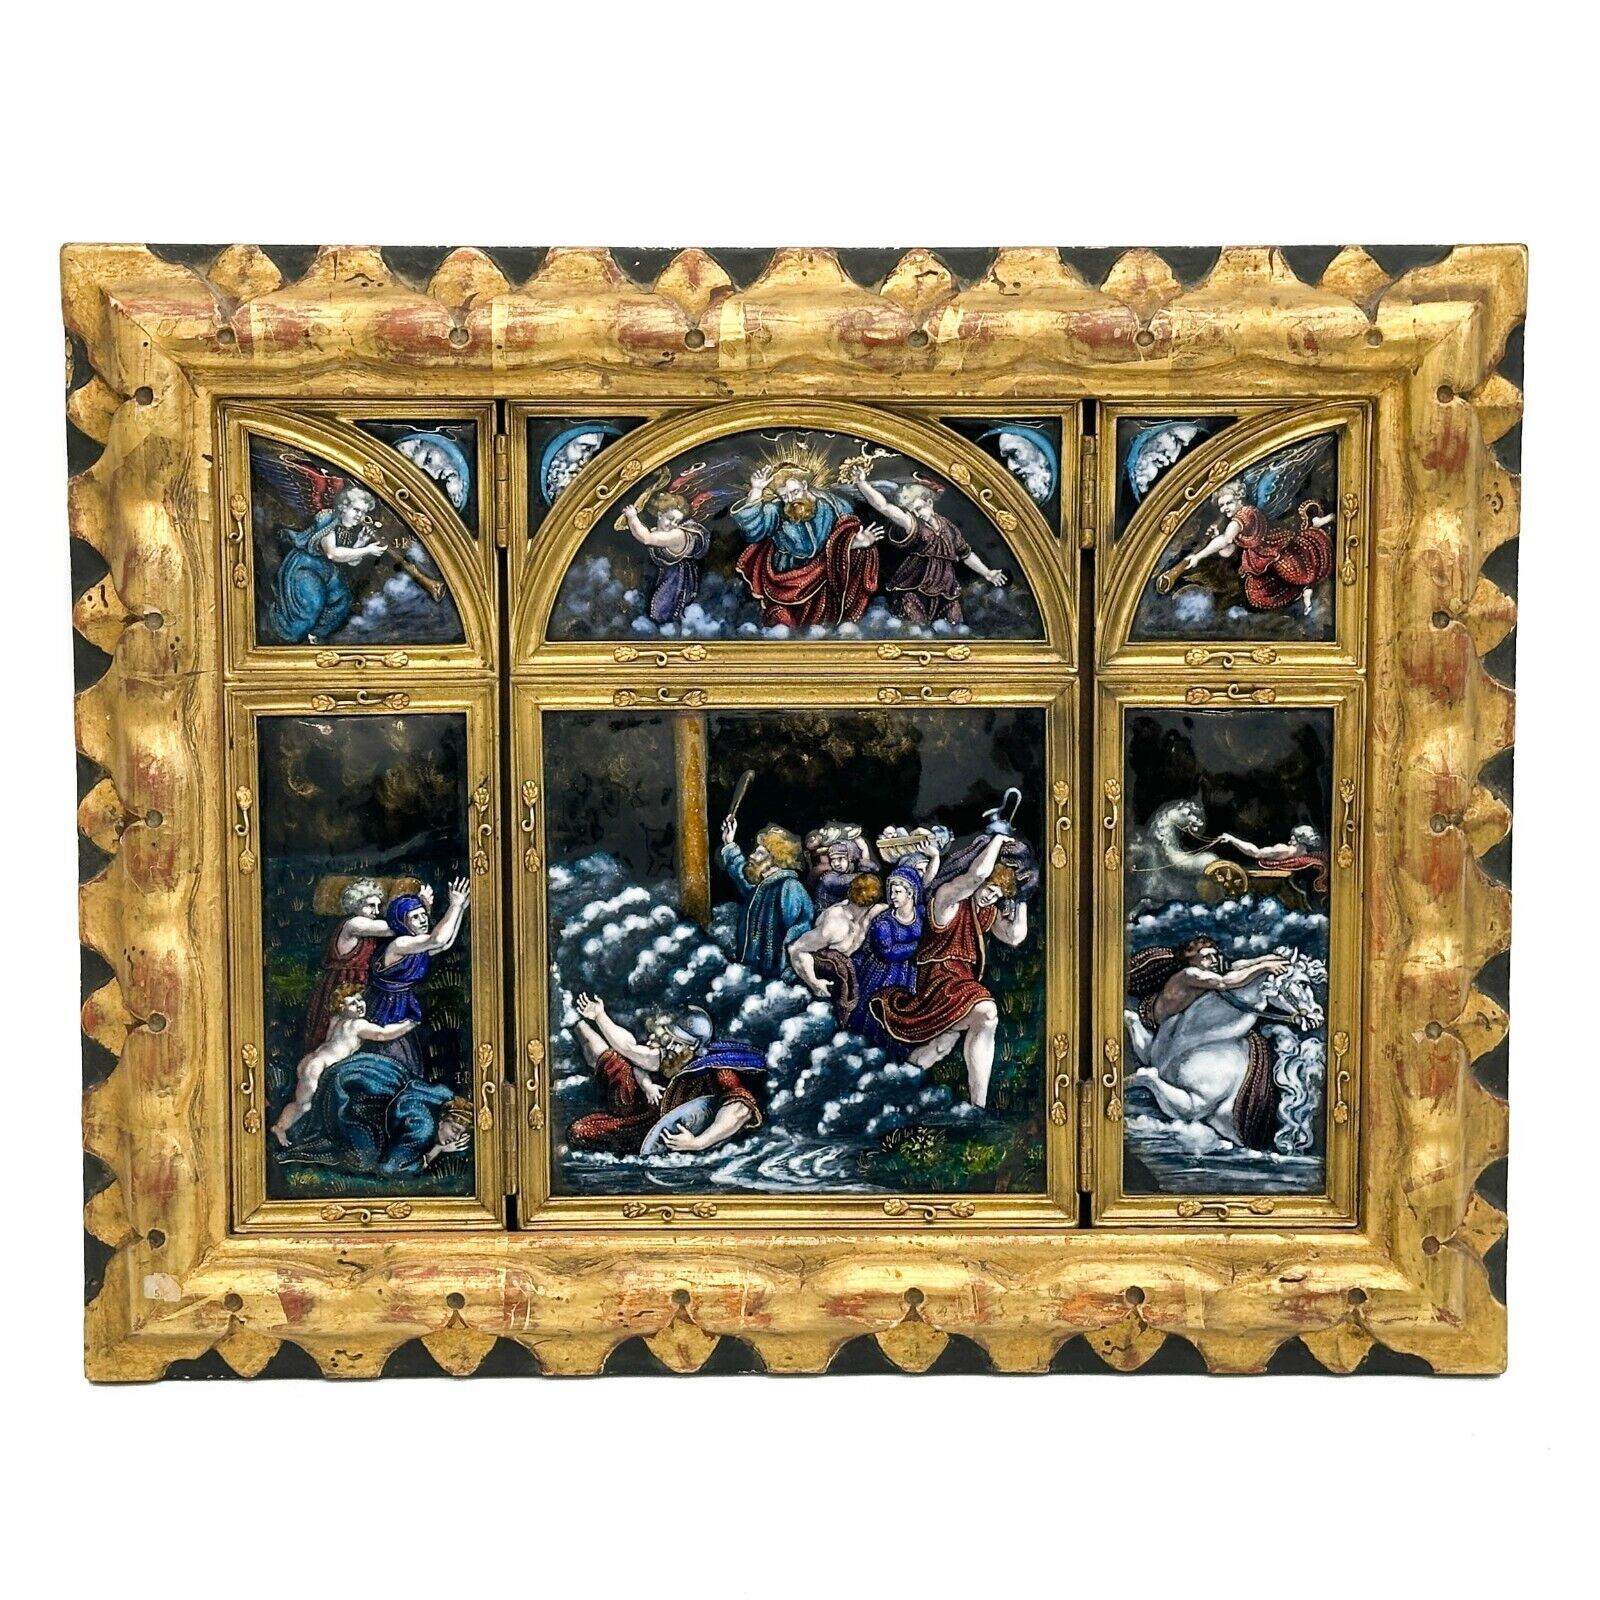 Limoges Enamel on Copper Plaques Painted Biblical Scene Triptych Framed 19th cen